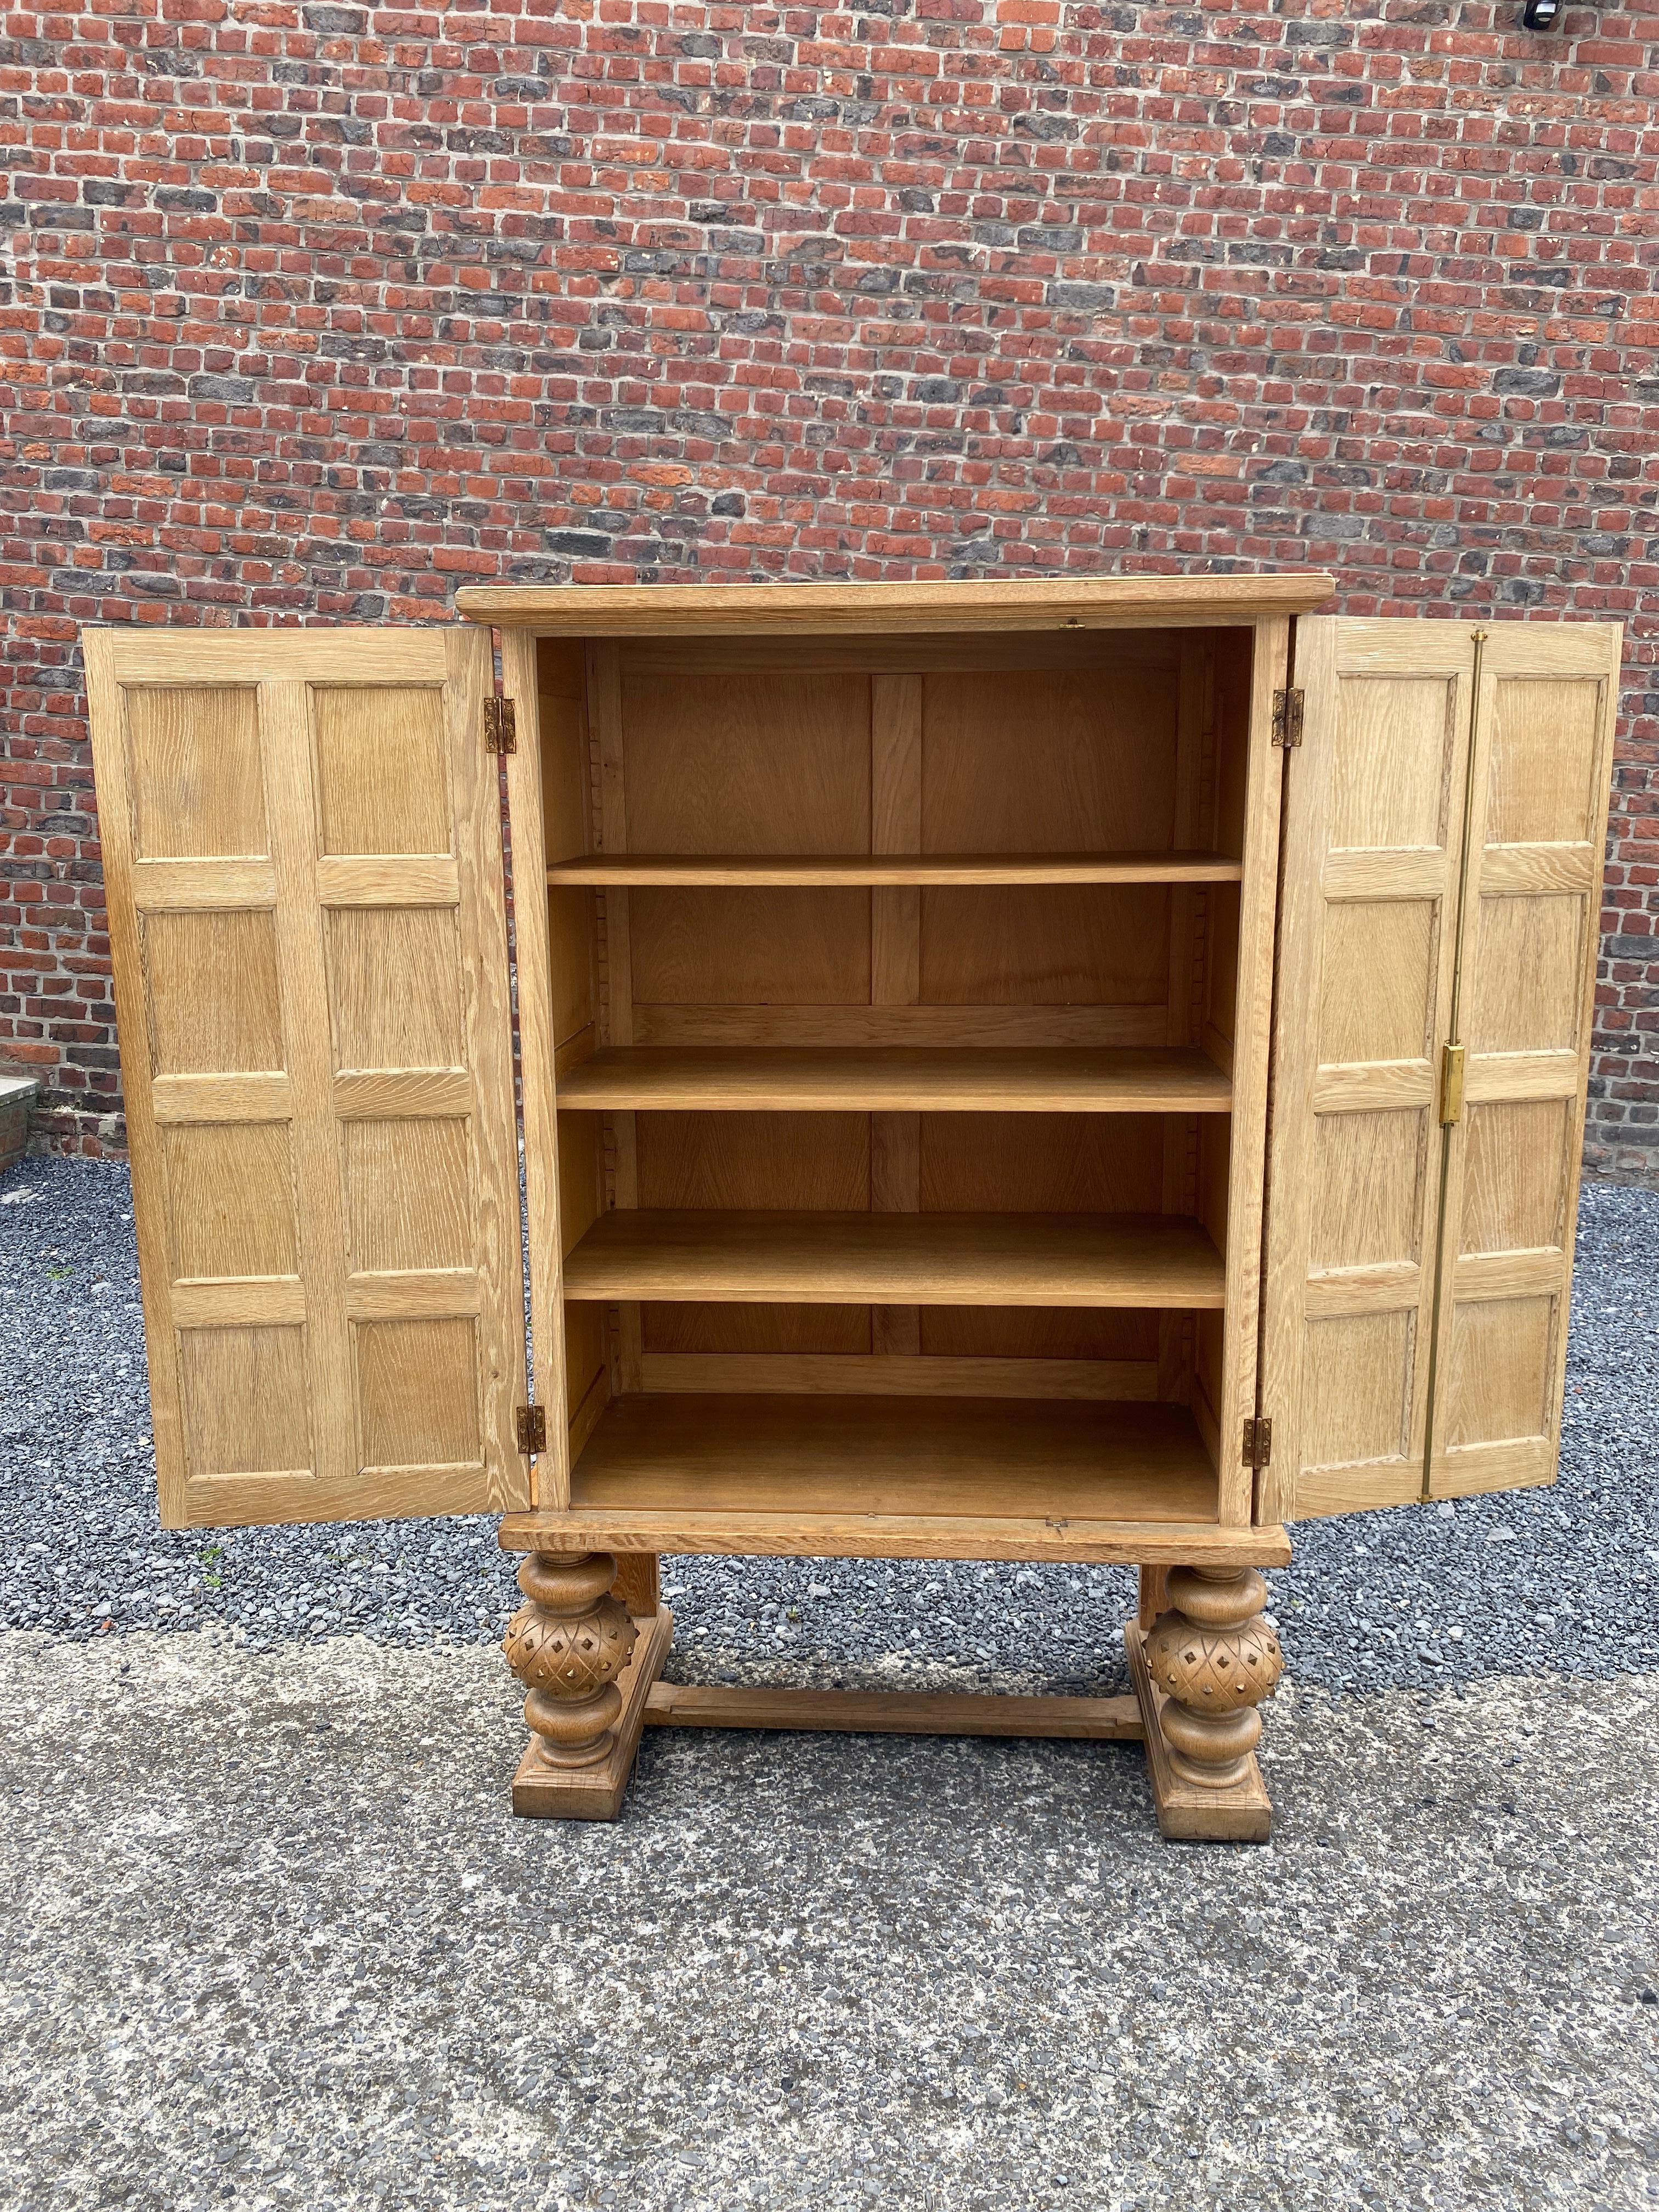 Baroque Revival Art Deco Cabinet in Oak and Embossed and Gilded Leather, circa 1940-1950 For Sale